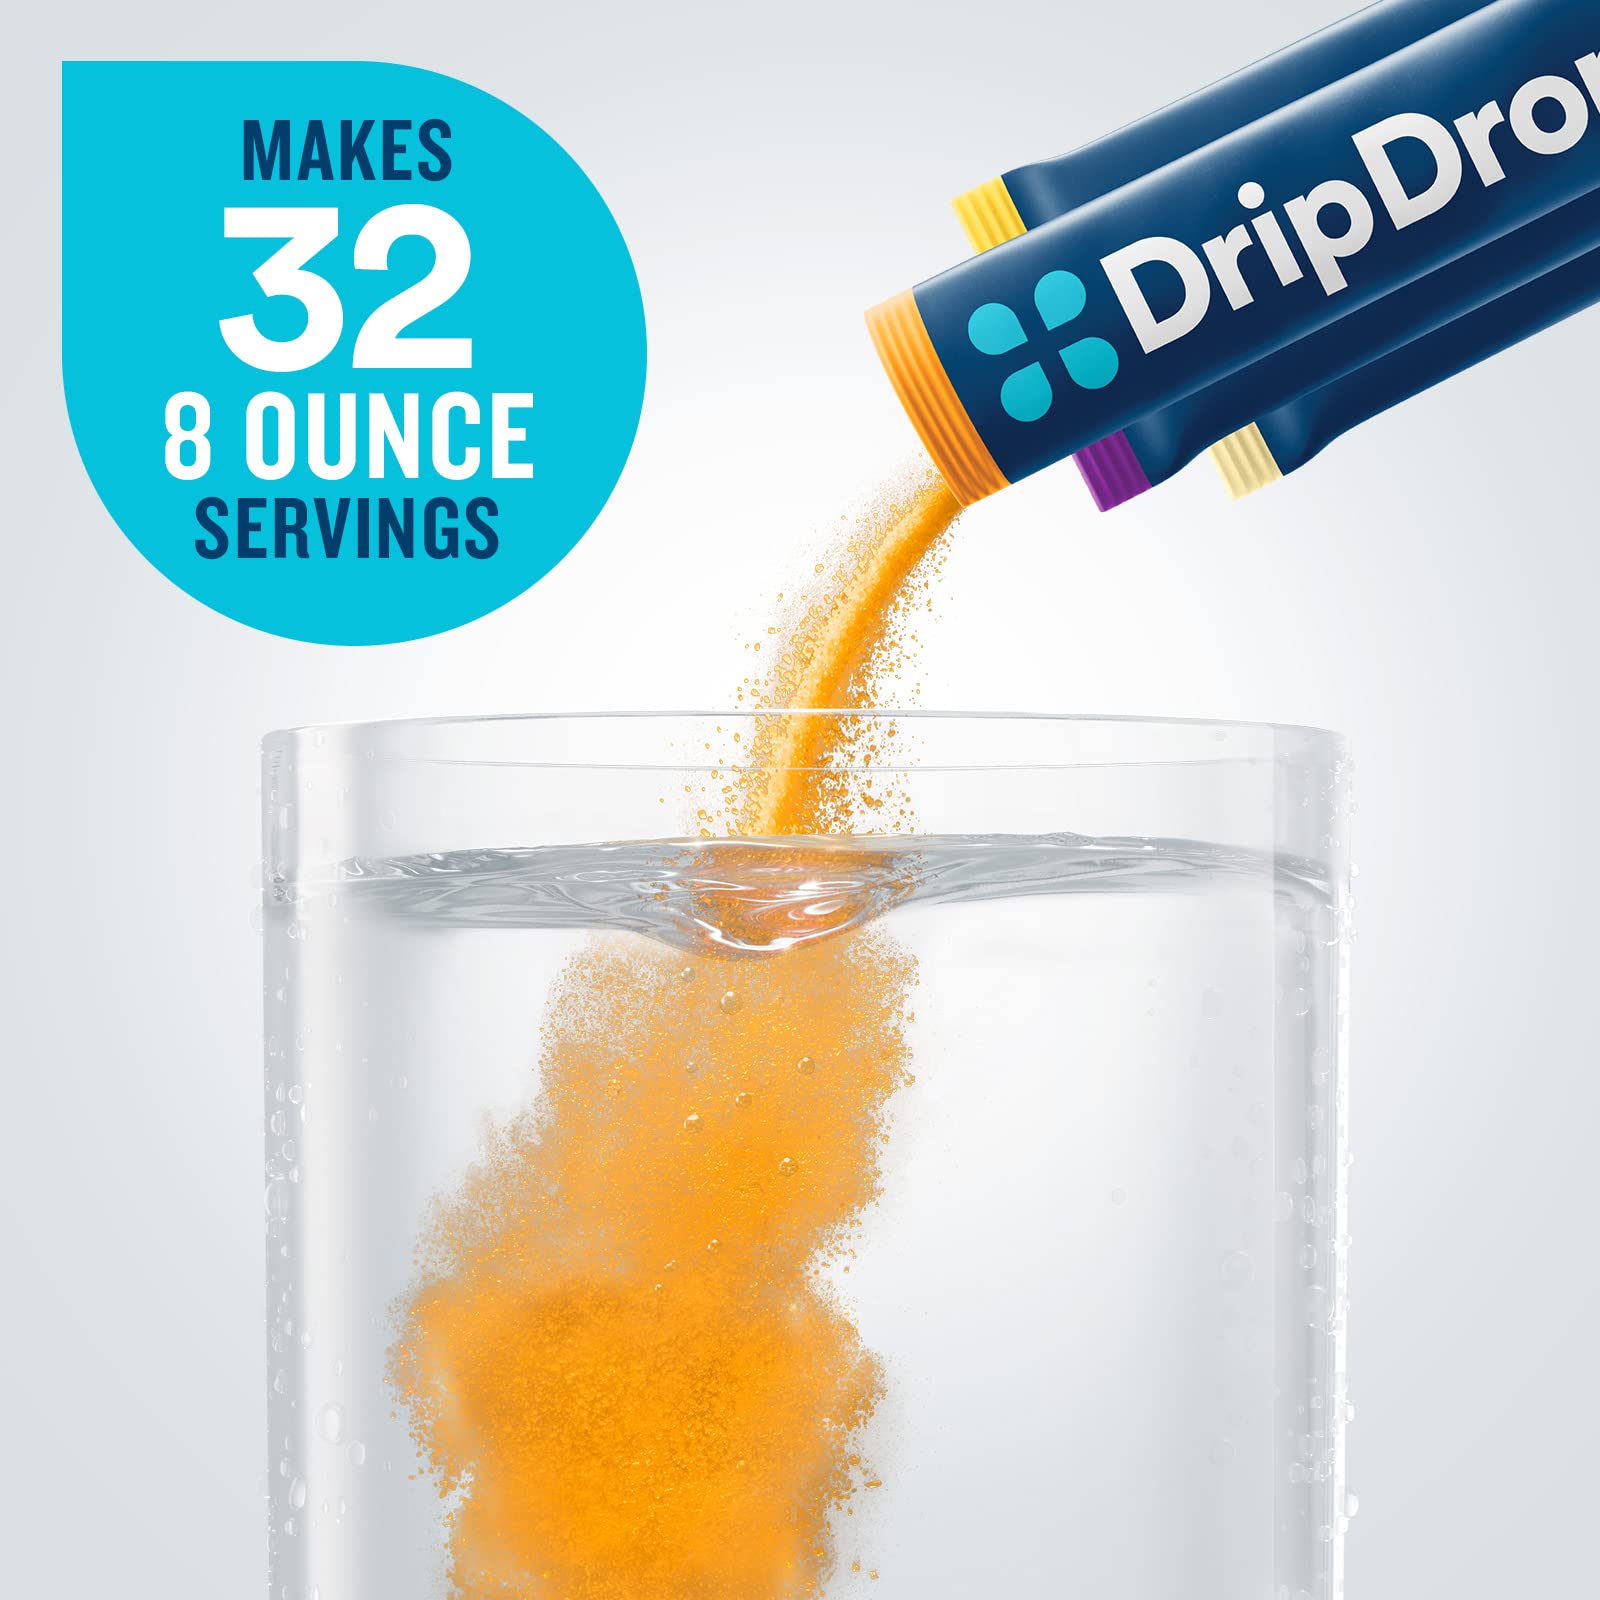 DripDrop Hydration - Electrolyte Powder Packets - Mango, Acai, Passion Fruit, Pineapple Coconut - 32 Count